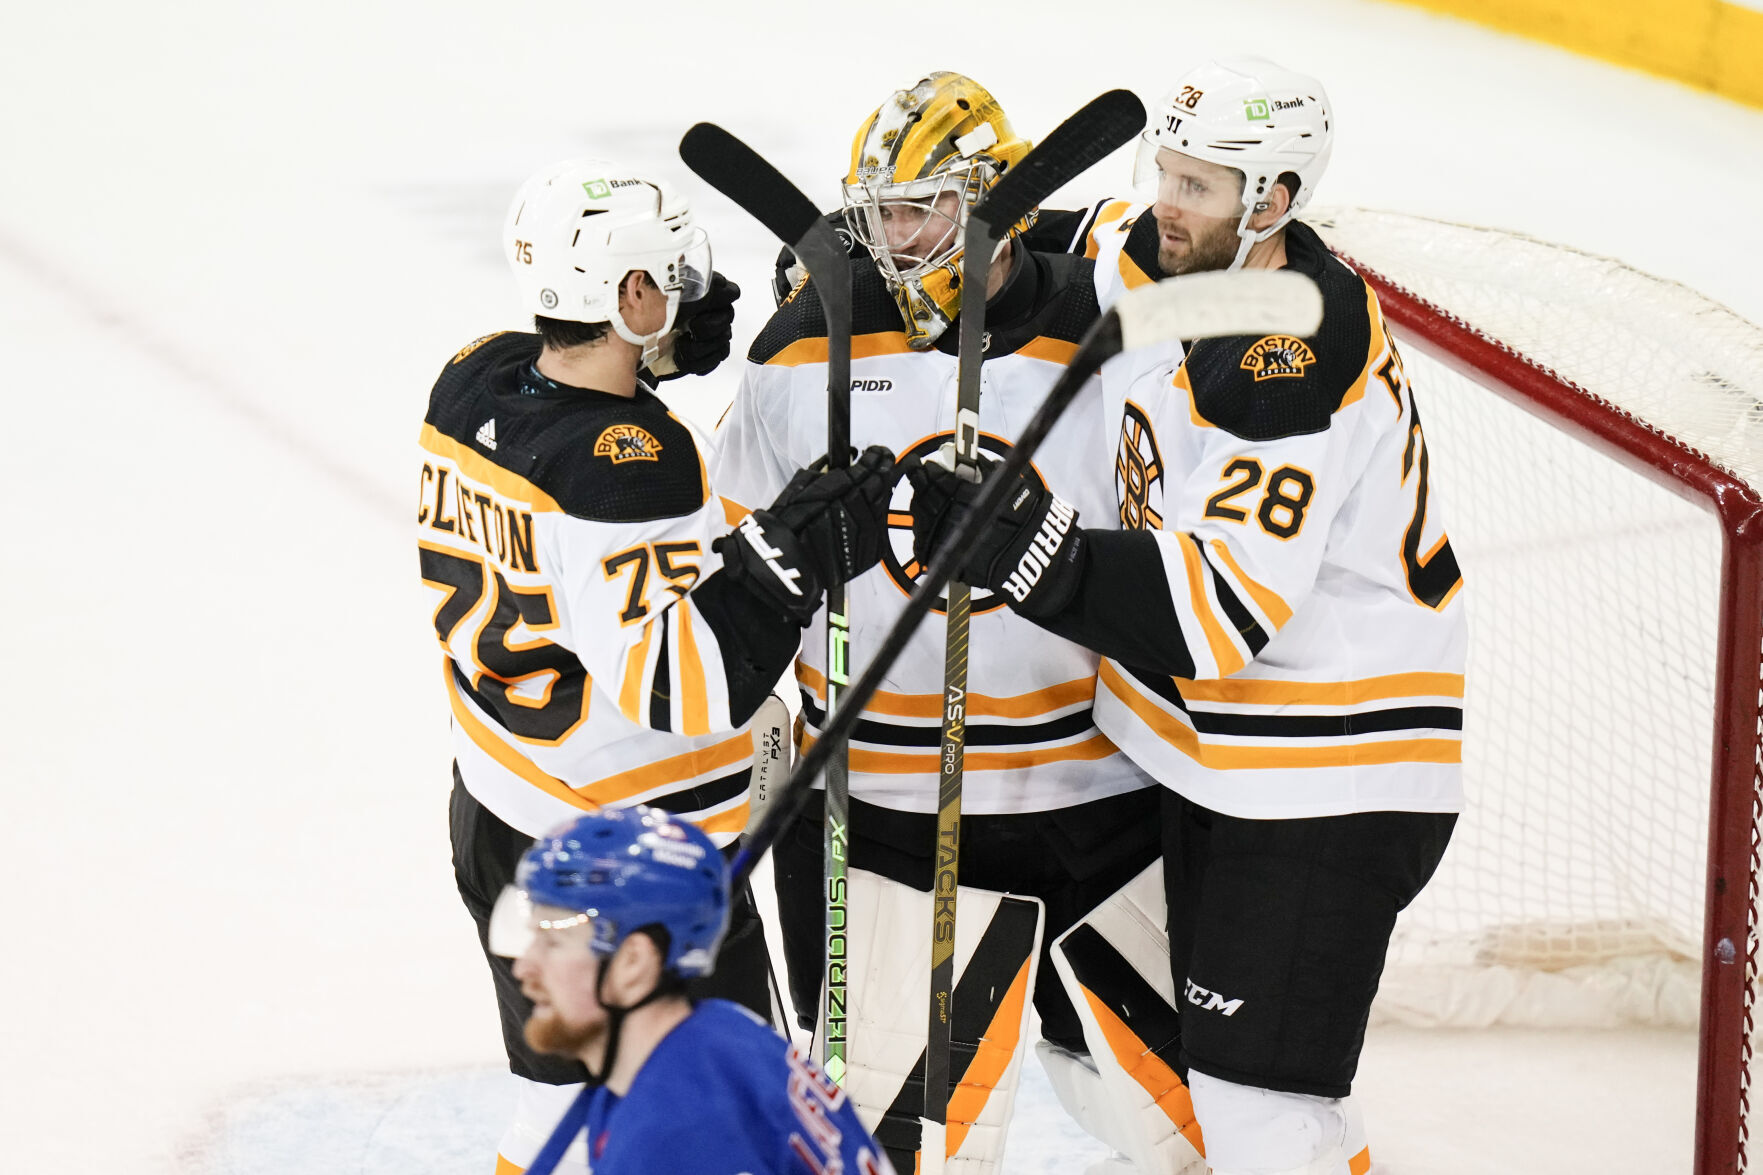 Bruins favored over Kane, Rangers in nationally televised game Saturday Betting gloucestertimes